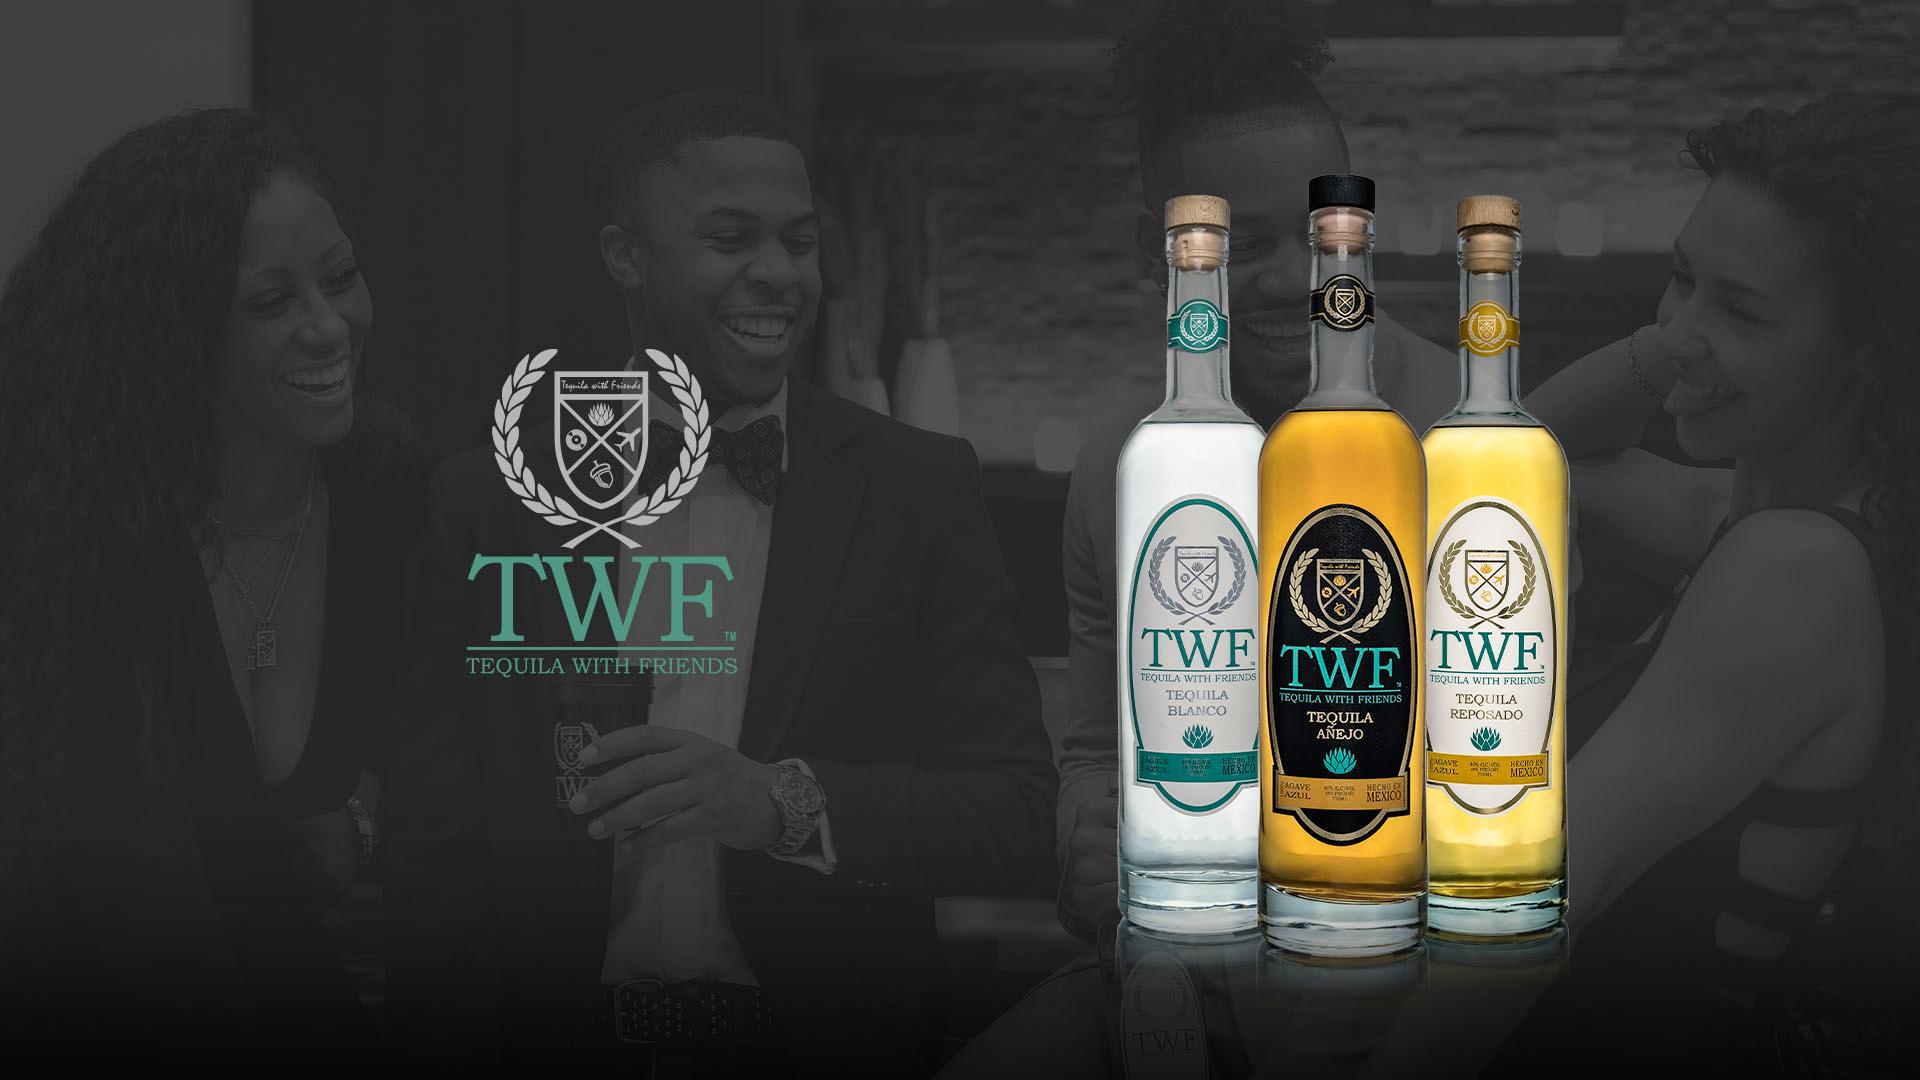 After the world experienced a bond forged in travel and adventure, Tequila With Friends™ (TWF) was founded and TWF Tequila Blanco was crafted. TWF Tequila Blanco is the spirit you need to create and share new experiences with friends. It’s infused with camaraderie and a spirit of exploration. Its unique chemistry binds people and time. Its sweet savory taste is the perfect compliment for good food, music, and new cultural experiences.

This tequila is the tool to create good times with great friends and memories that last a lifetime!